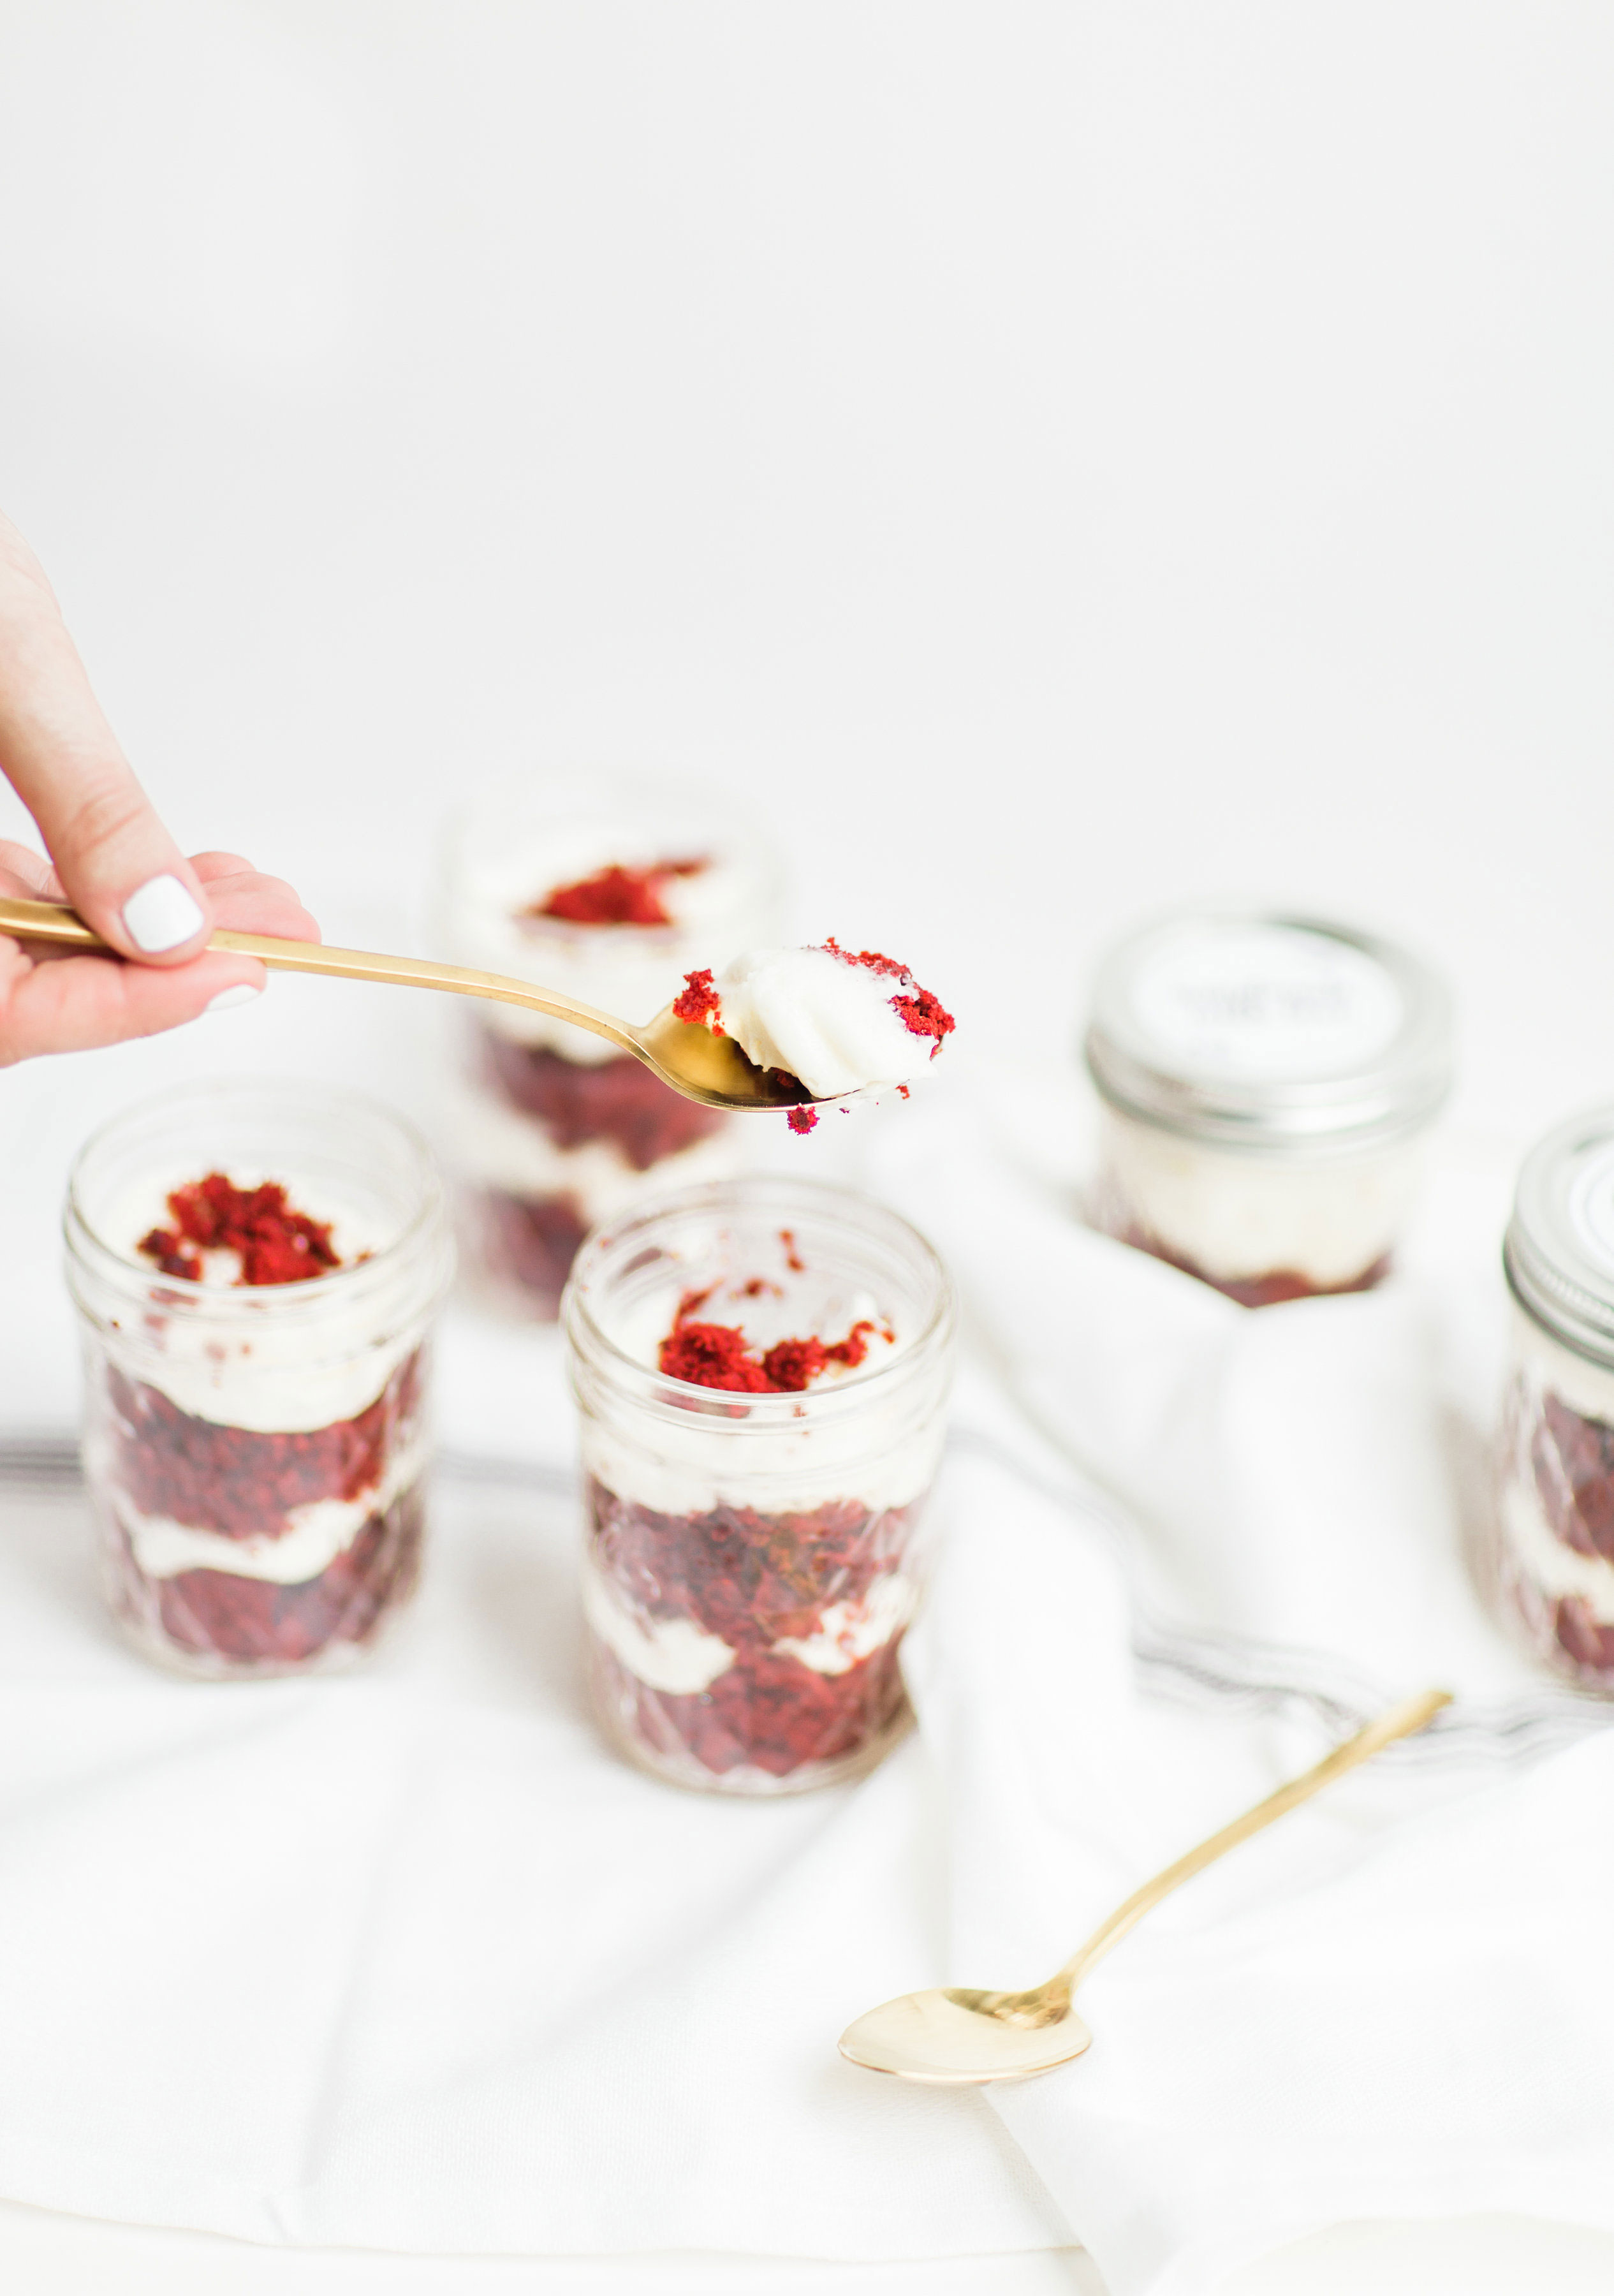 How to make my absolute FAVORITE moist red velvet cupcakes. Put them in jars for the sweetest gift! Click through for the recipe. | glitterinc.com | @glitterinc